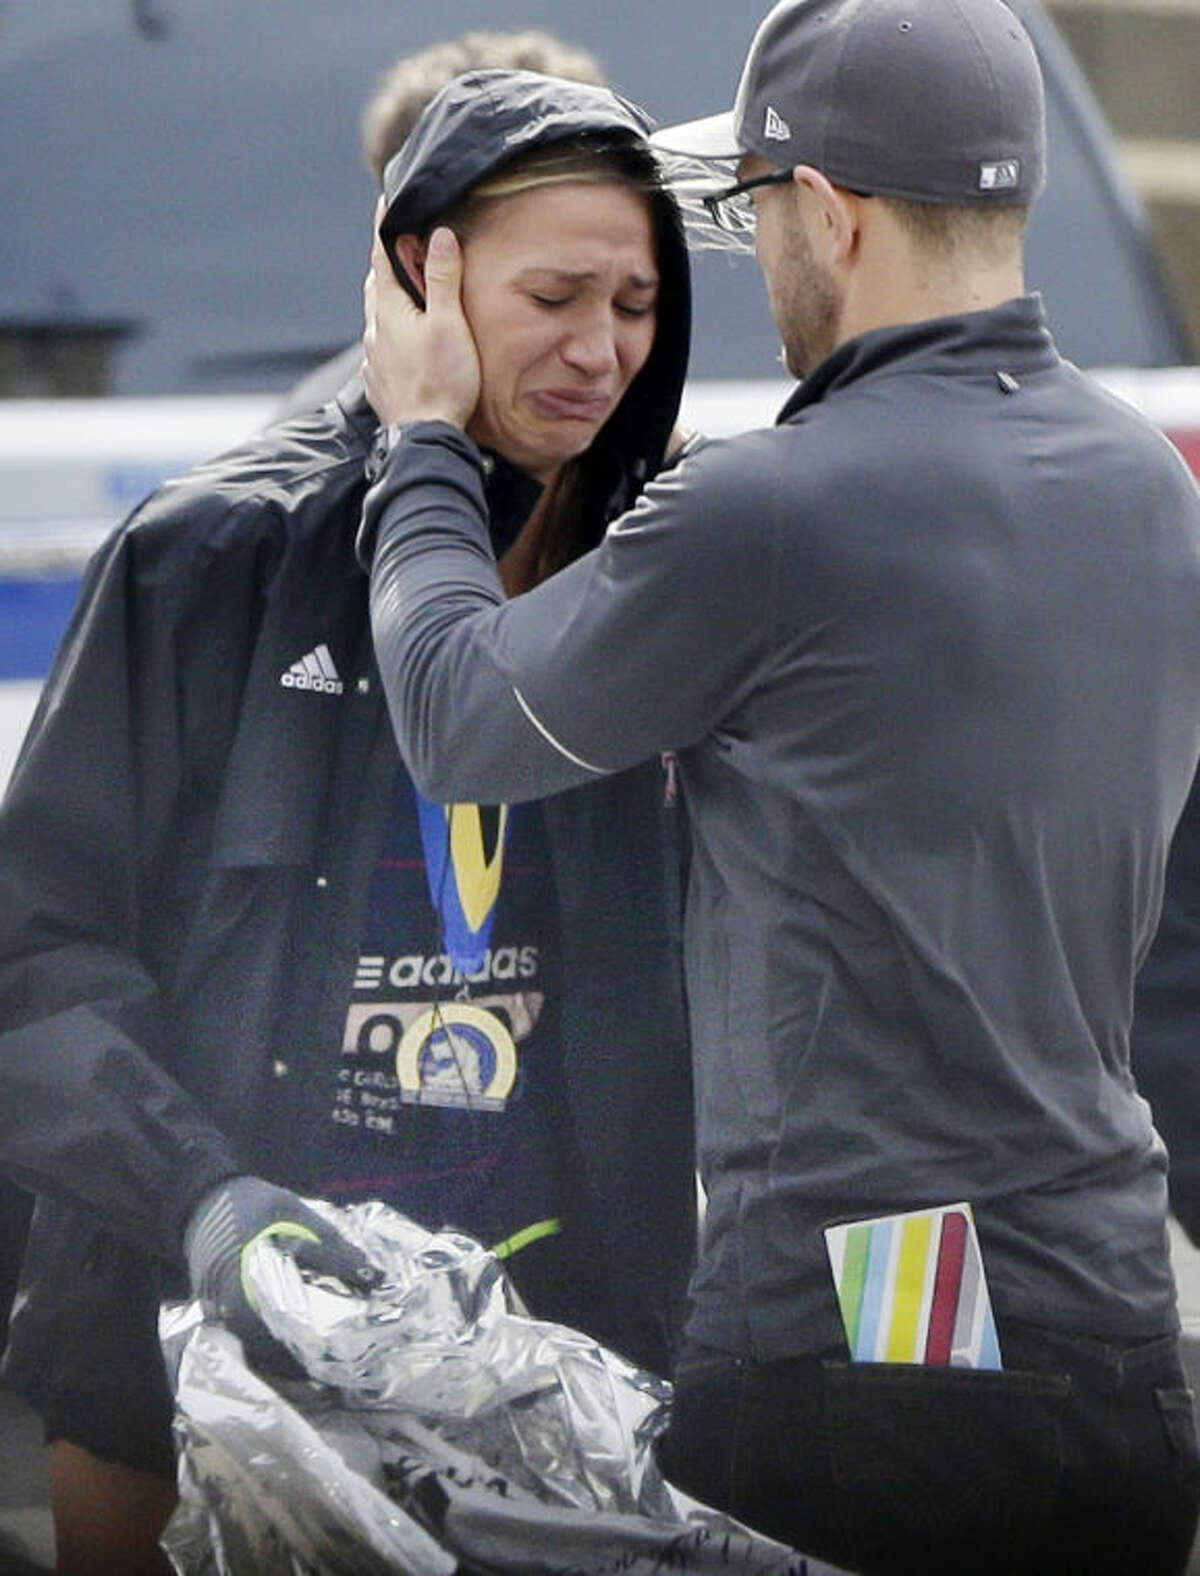 An unidentified Boston Marathon runner is comforted as she cries in the aftermath of two blasts which exploded near the finish line of the Boston Marathon in Boston, Monday, April 15, 2013. (AP Photo/Elise Amendola)